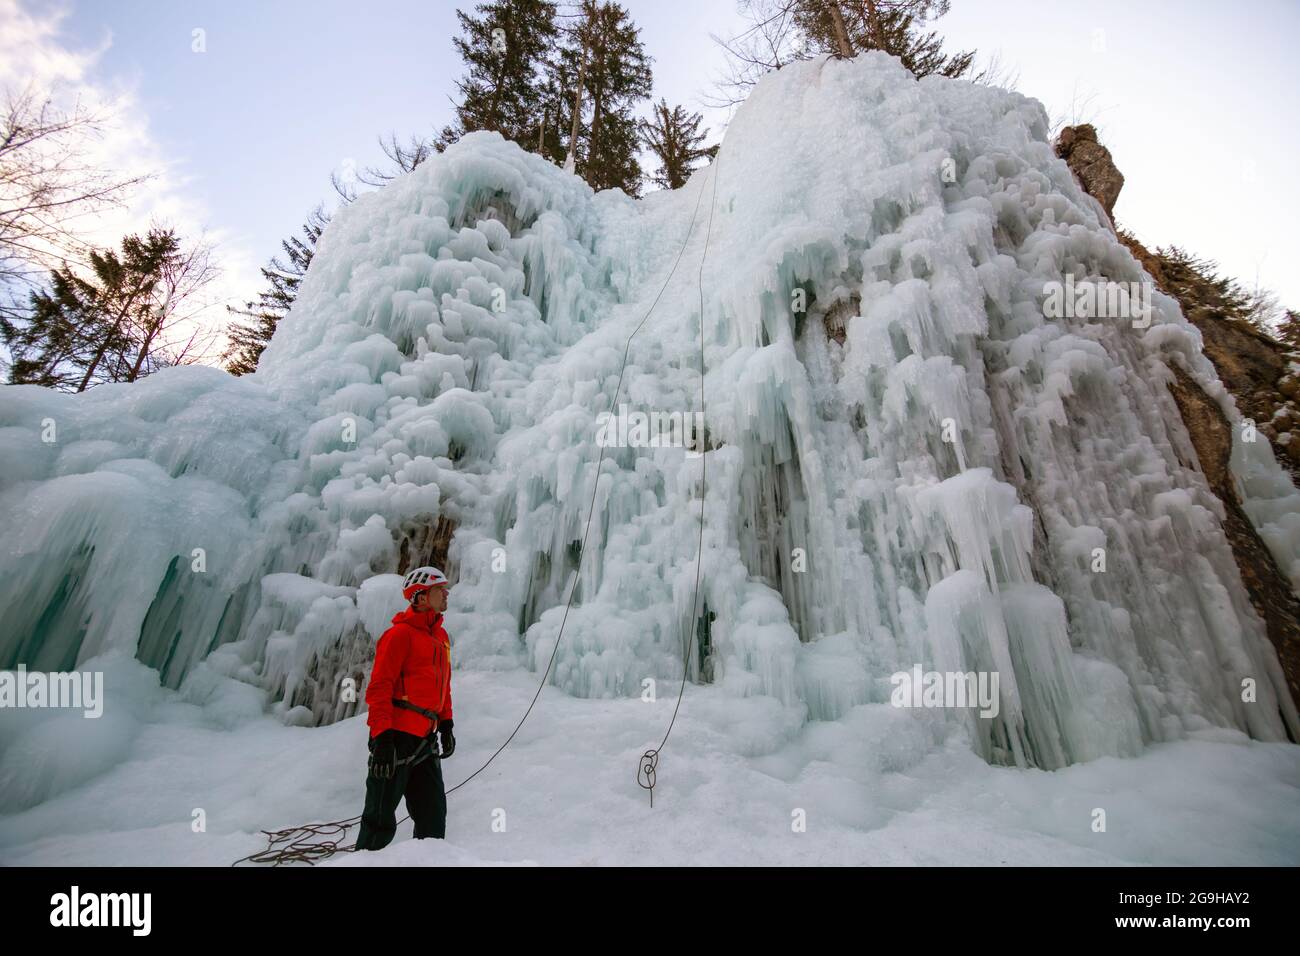 Man standing and controlling a safety top rope while female with ice climbing equipment, climbing on a frozen waterfall Stock Photo